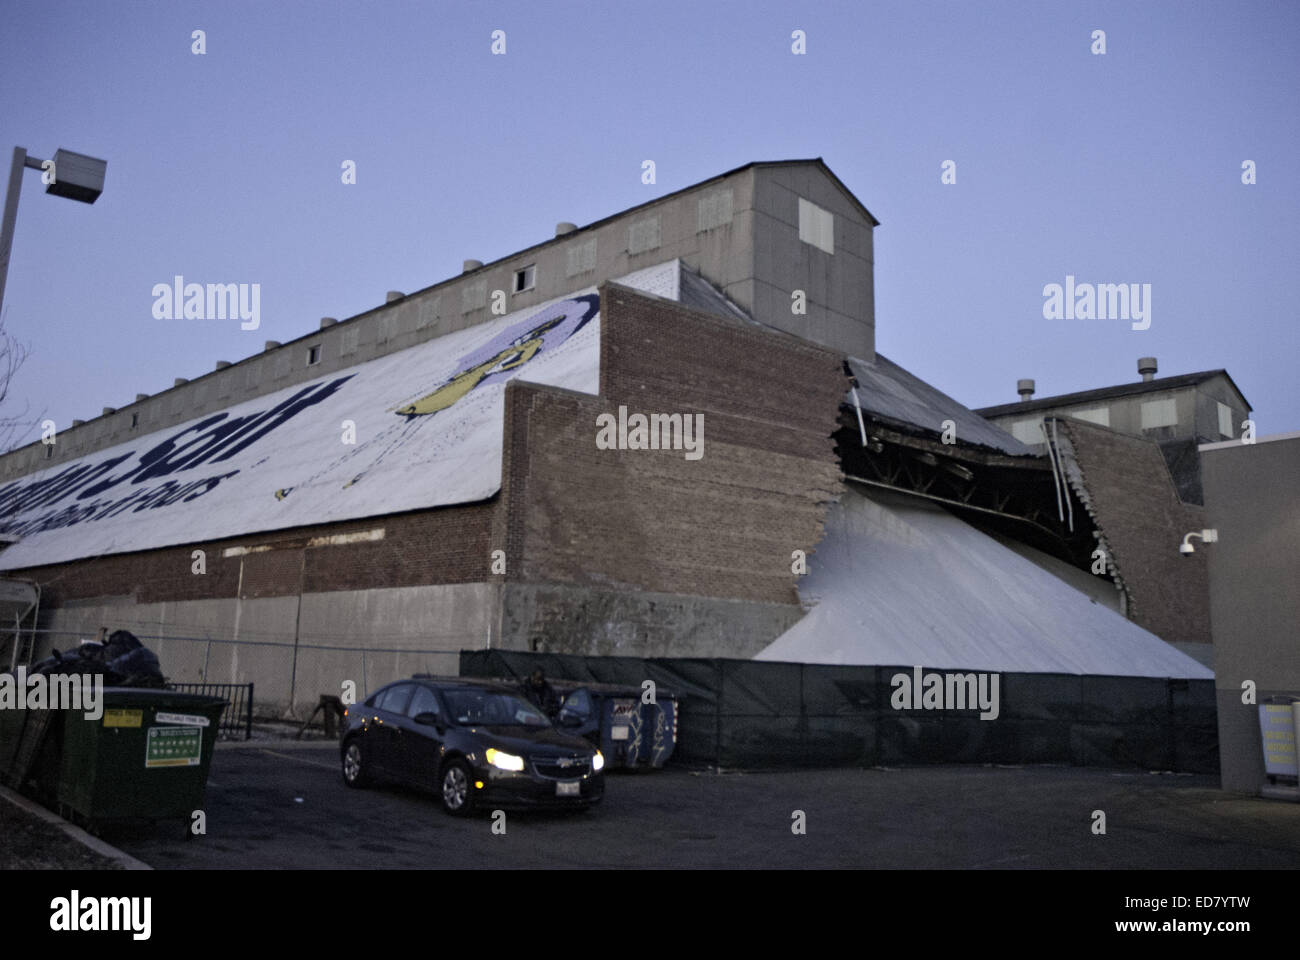 Chicago, Illinois, USA. 31st Dec, 2014. On December 30, 2014, a mountain of salt broke through a wall at the Morton Salt plant in Chicago, spilling into the McGrath Acura car dealership next door. The Sun-Times reported that eleven cars parked at the dealership were buried by the outpouring of the salt. According to Julian Rice, a security guard on duty, the salt continued its downslide today, breaking the back windows and filling a couple of the cars. Preliminary investigation found that the salt inside the building was piled too high, producing the pressure that caused the wall to collap Stock Photo